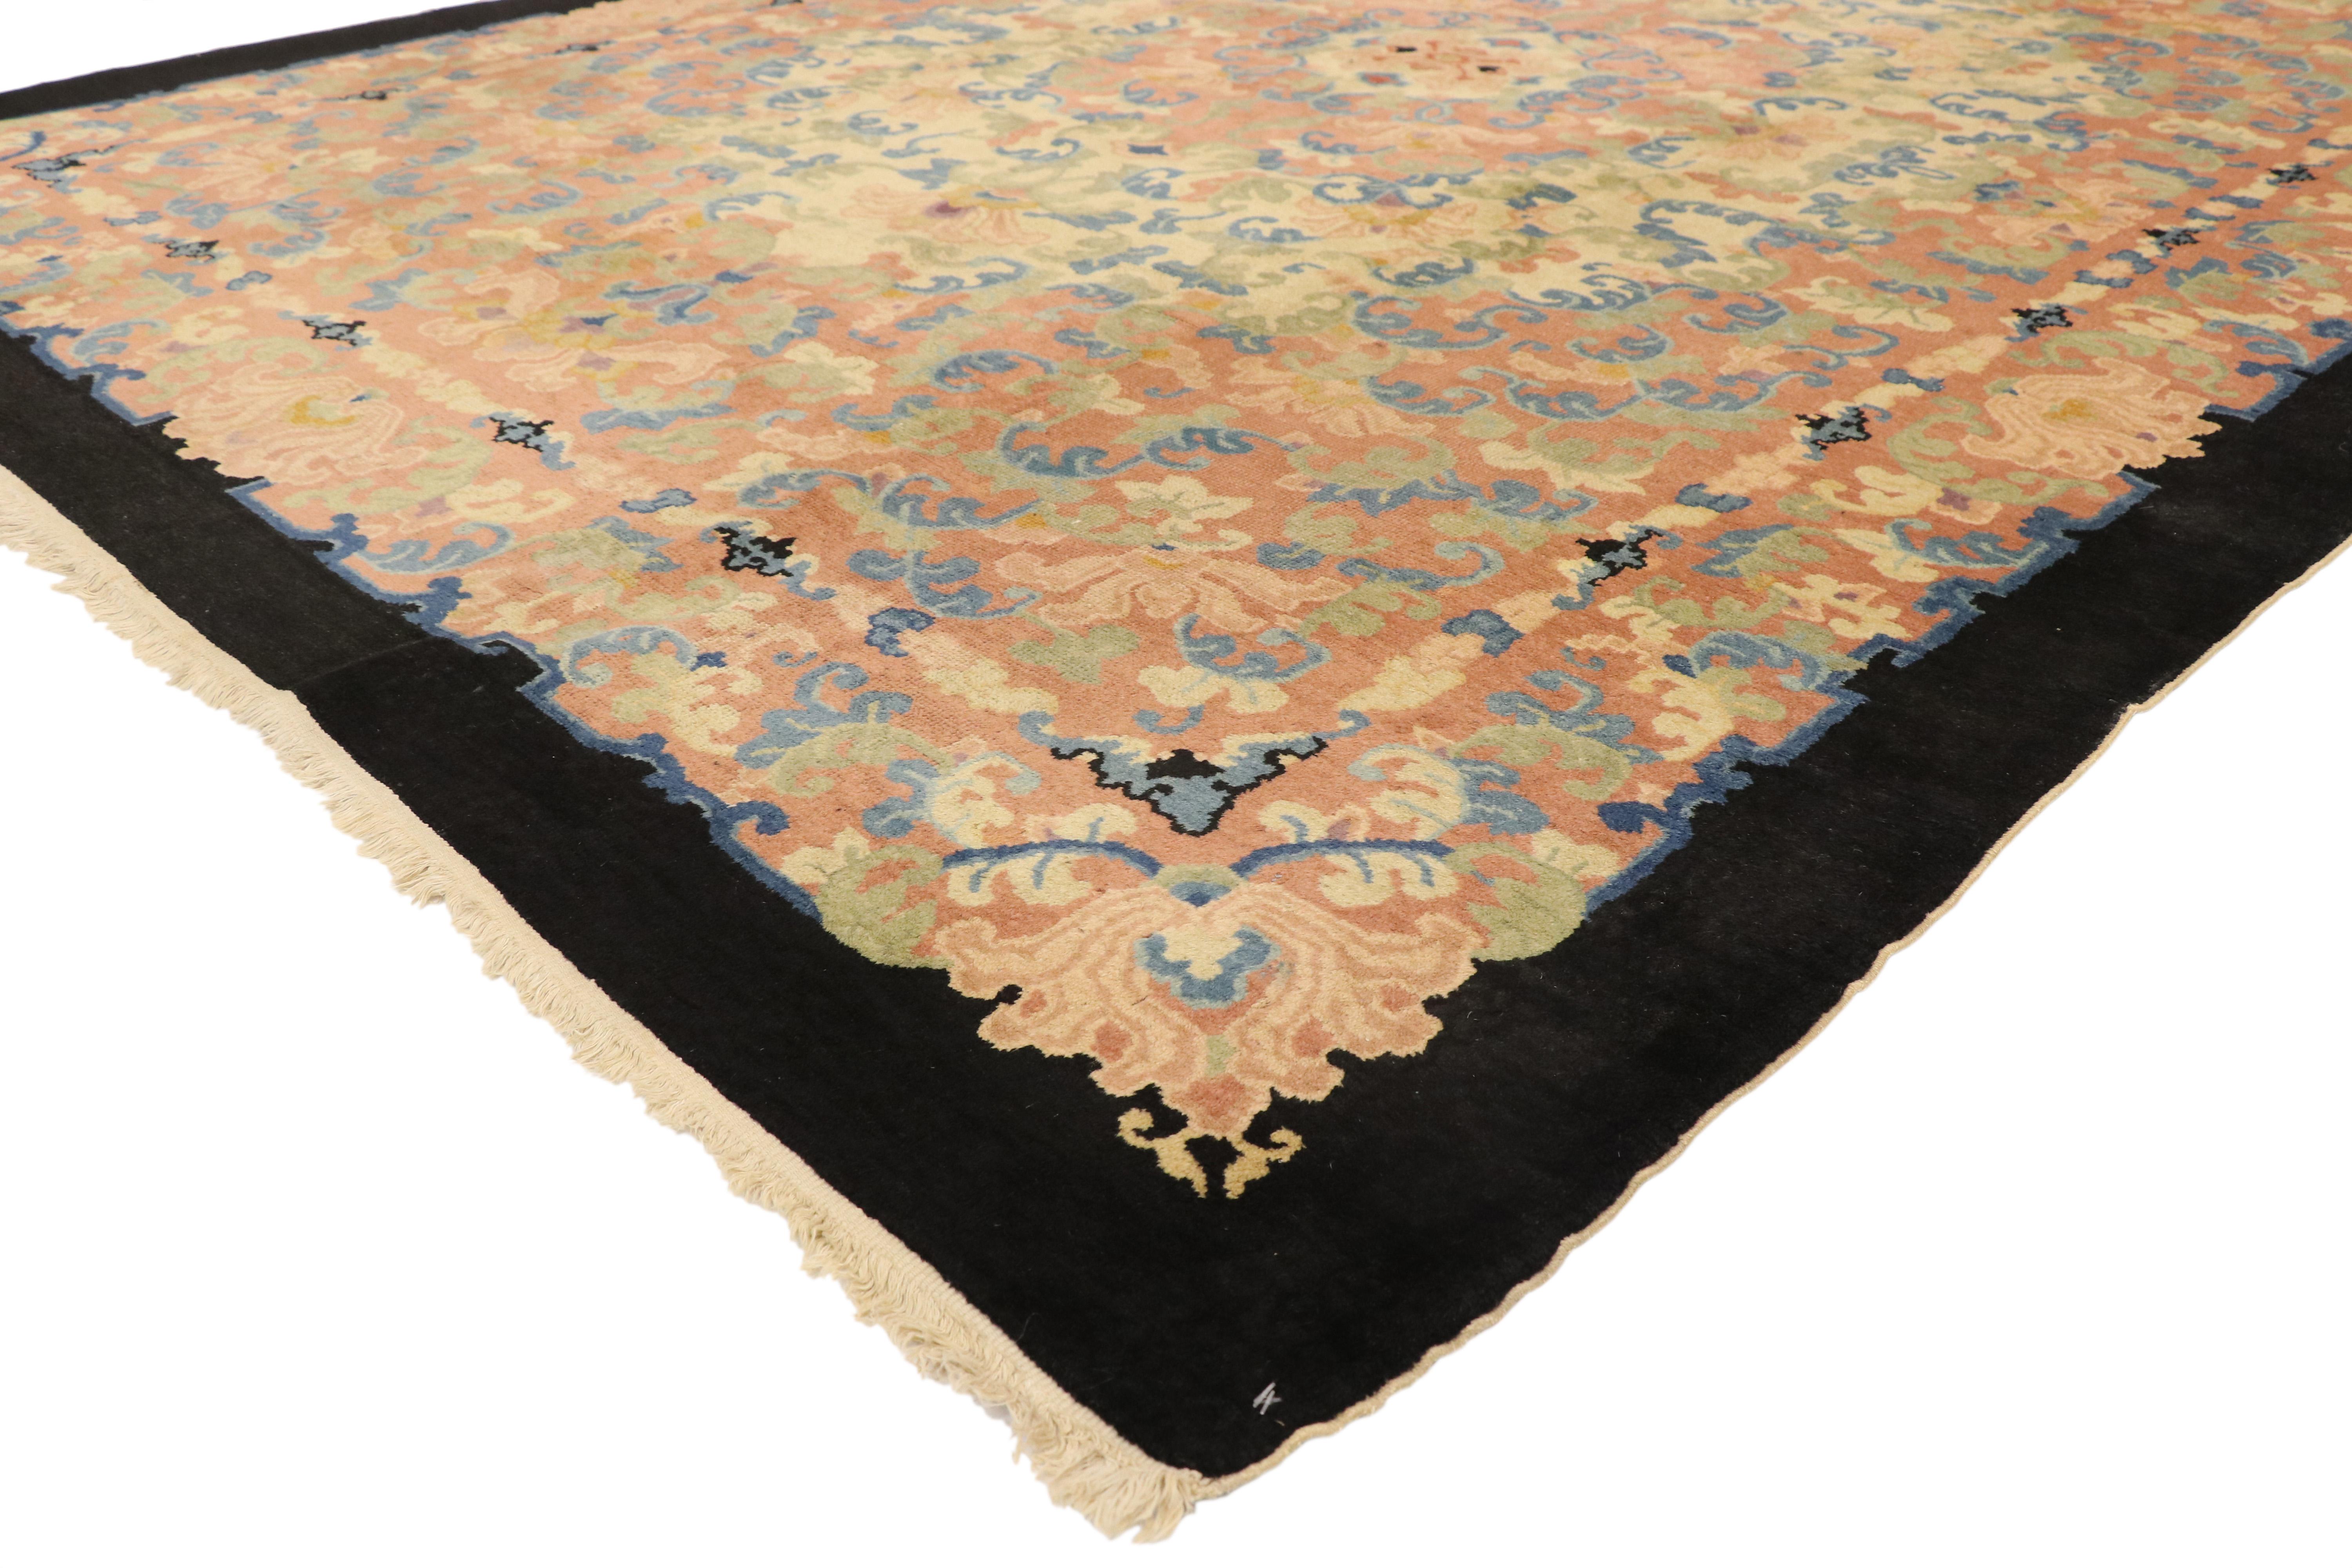 French Provincial Antique Chinese Peking Rug with Romantic French Country Style